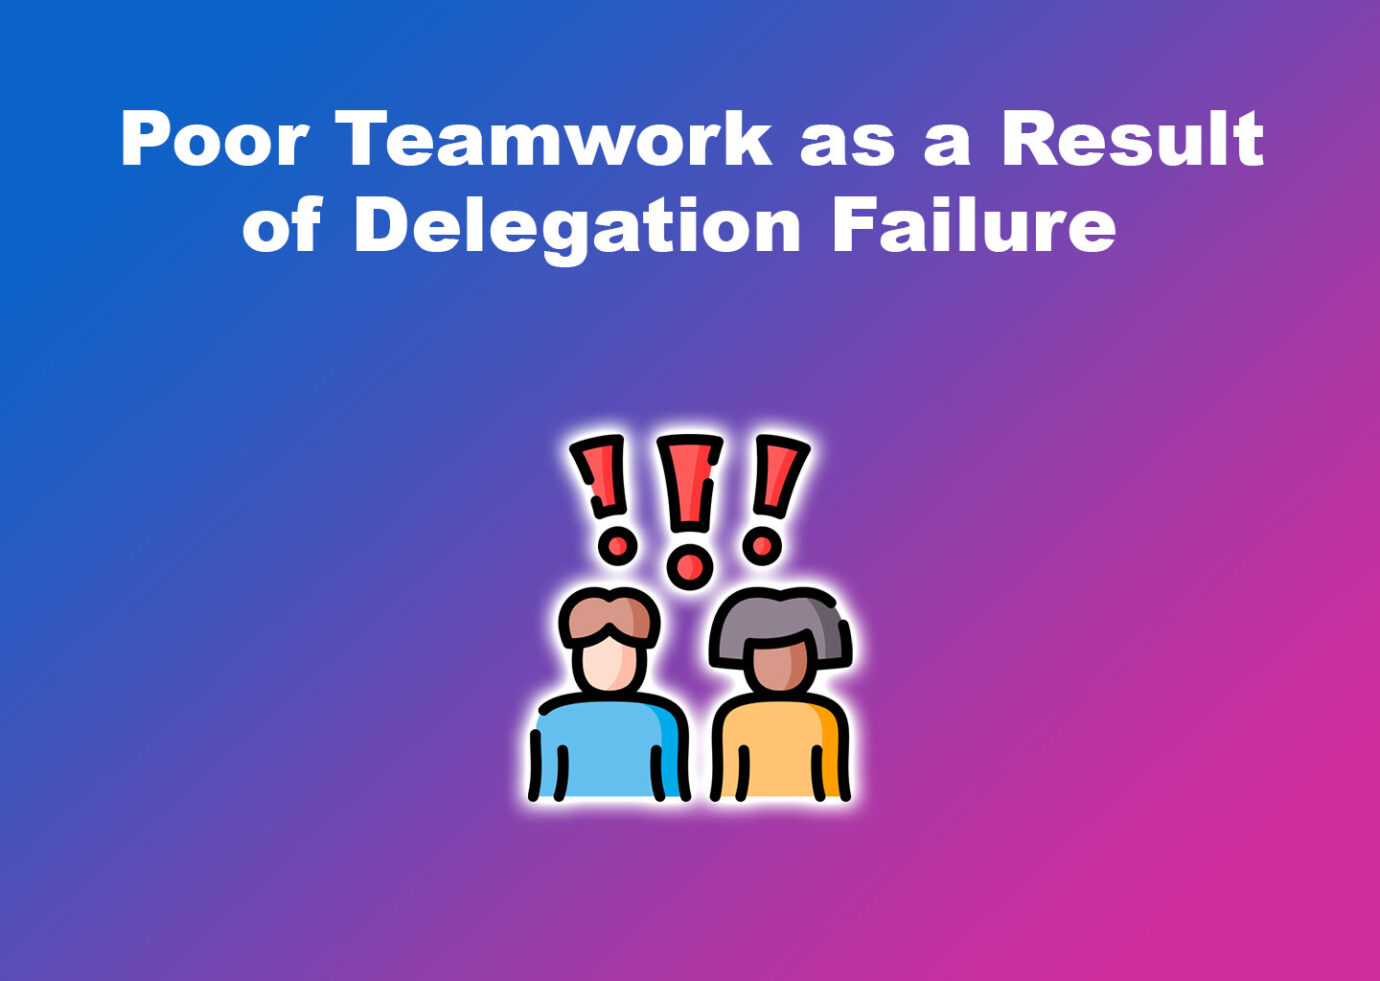 Poor Teamwork as a Result of Delegation Failure